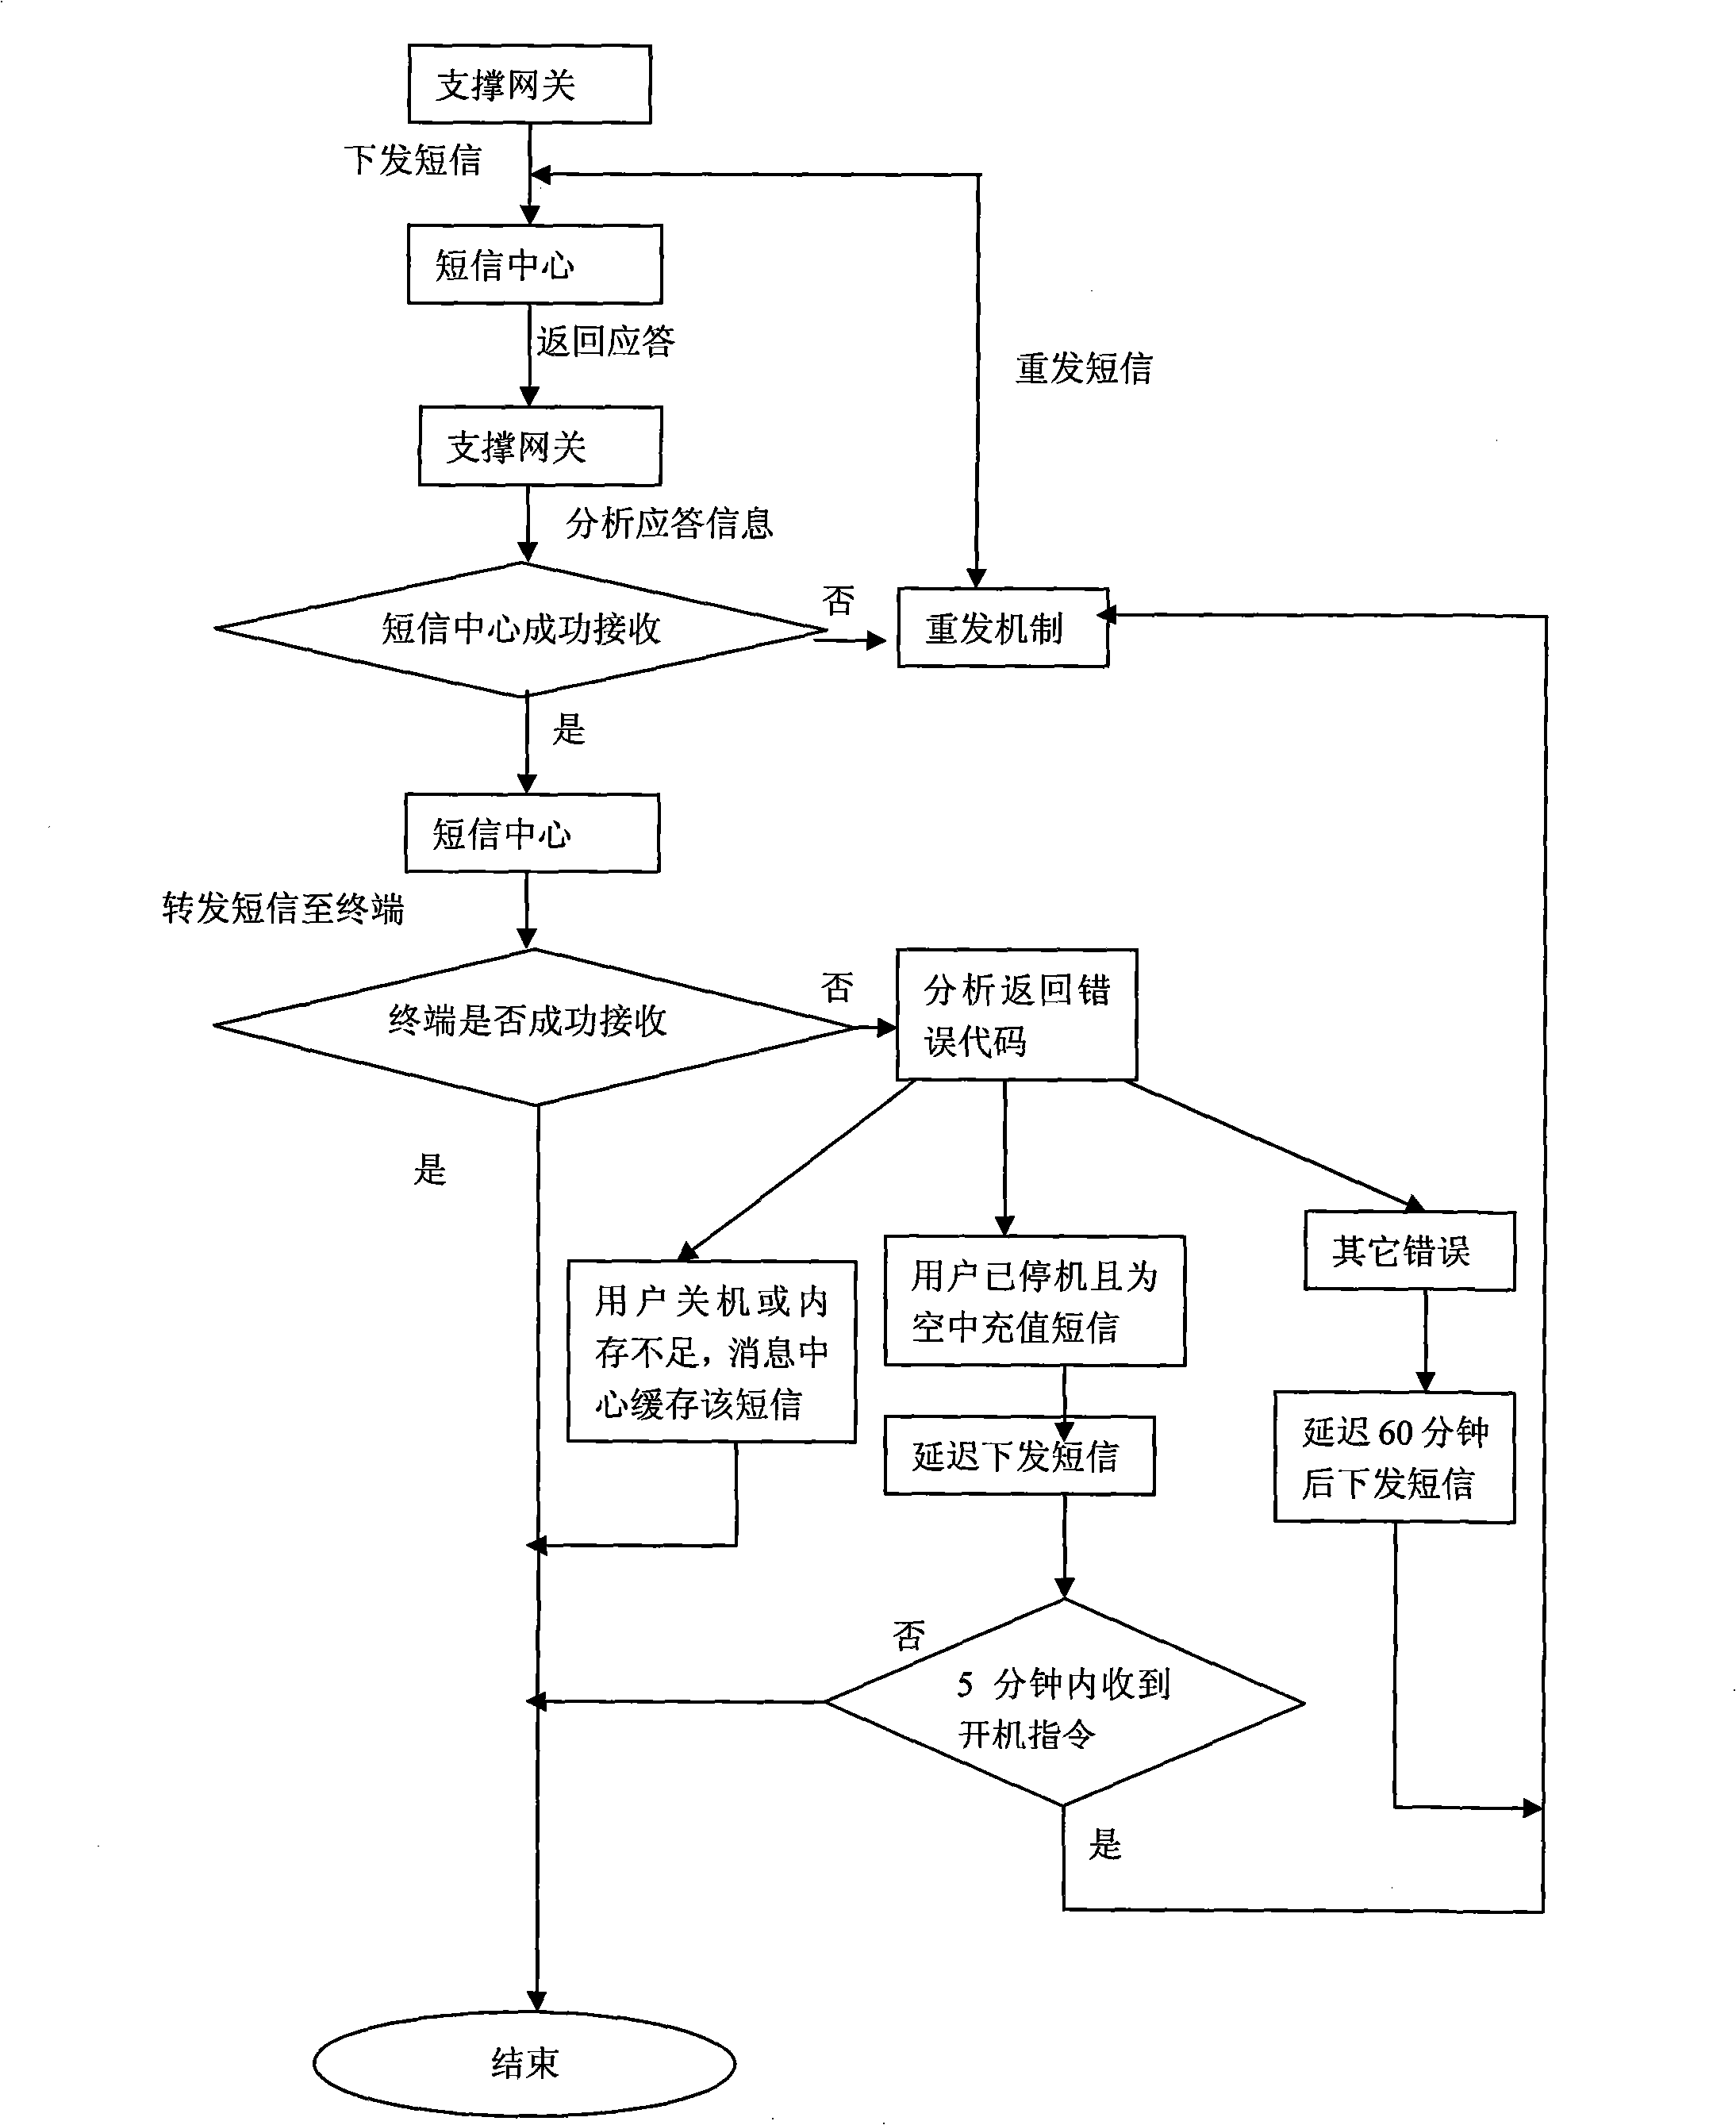 Method for guaranteeing sending message arrival of service support system